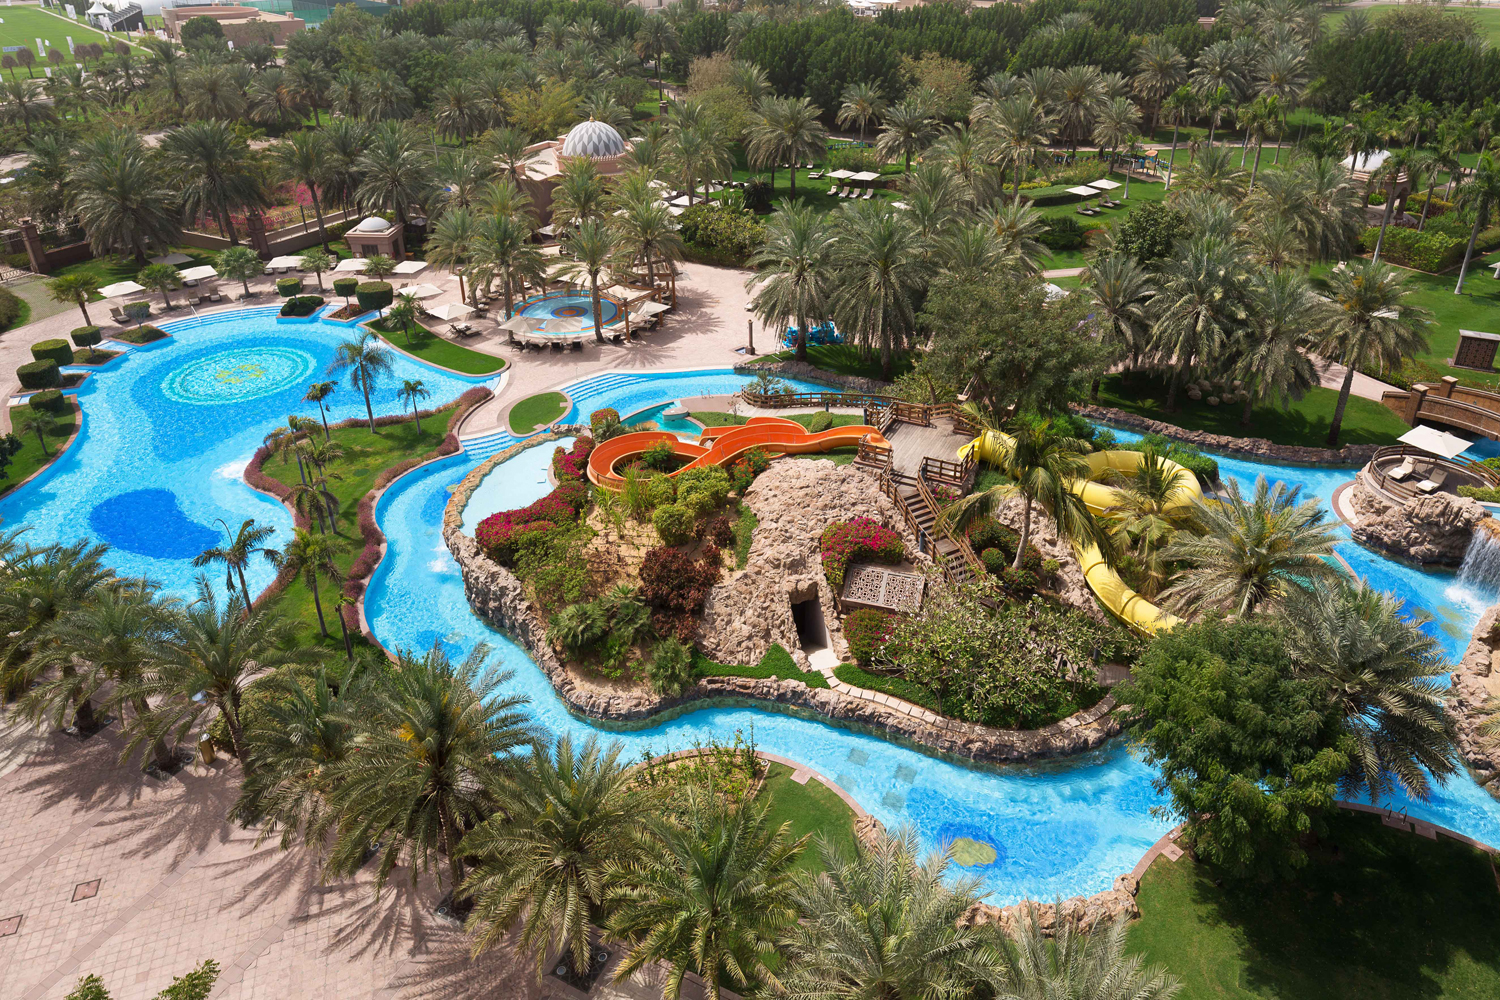 Abu Dhabi's Emirates Palace introduces day pass deal for beach and pool